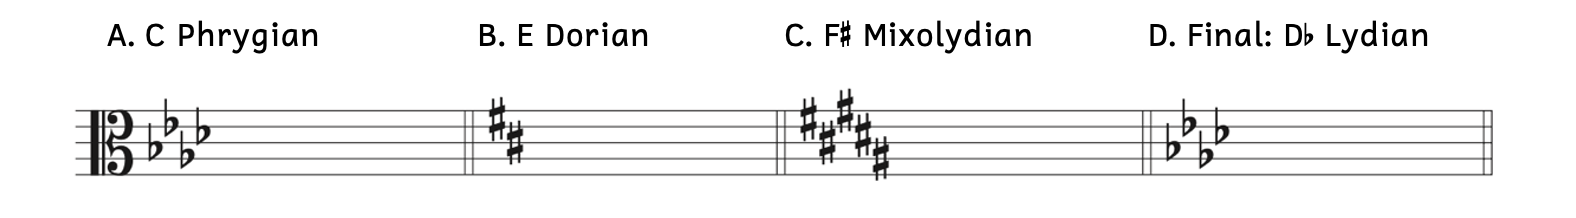 Example A is C Phrygian. Example B is E Dorian. Example C is F-sharp Mixolydian. Example D is D-flat Lydian.